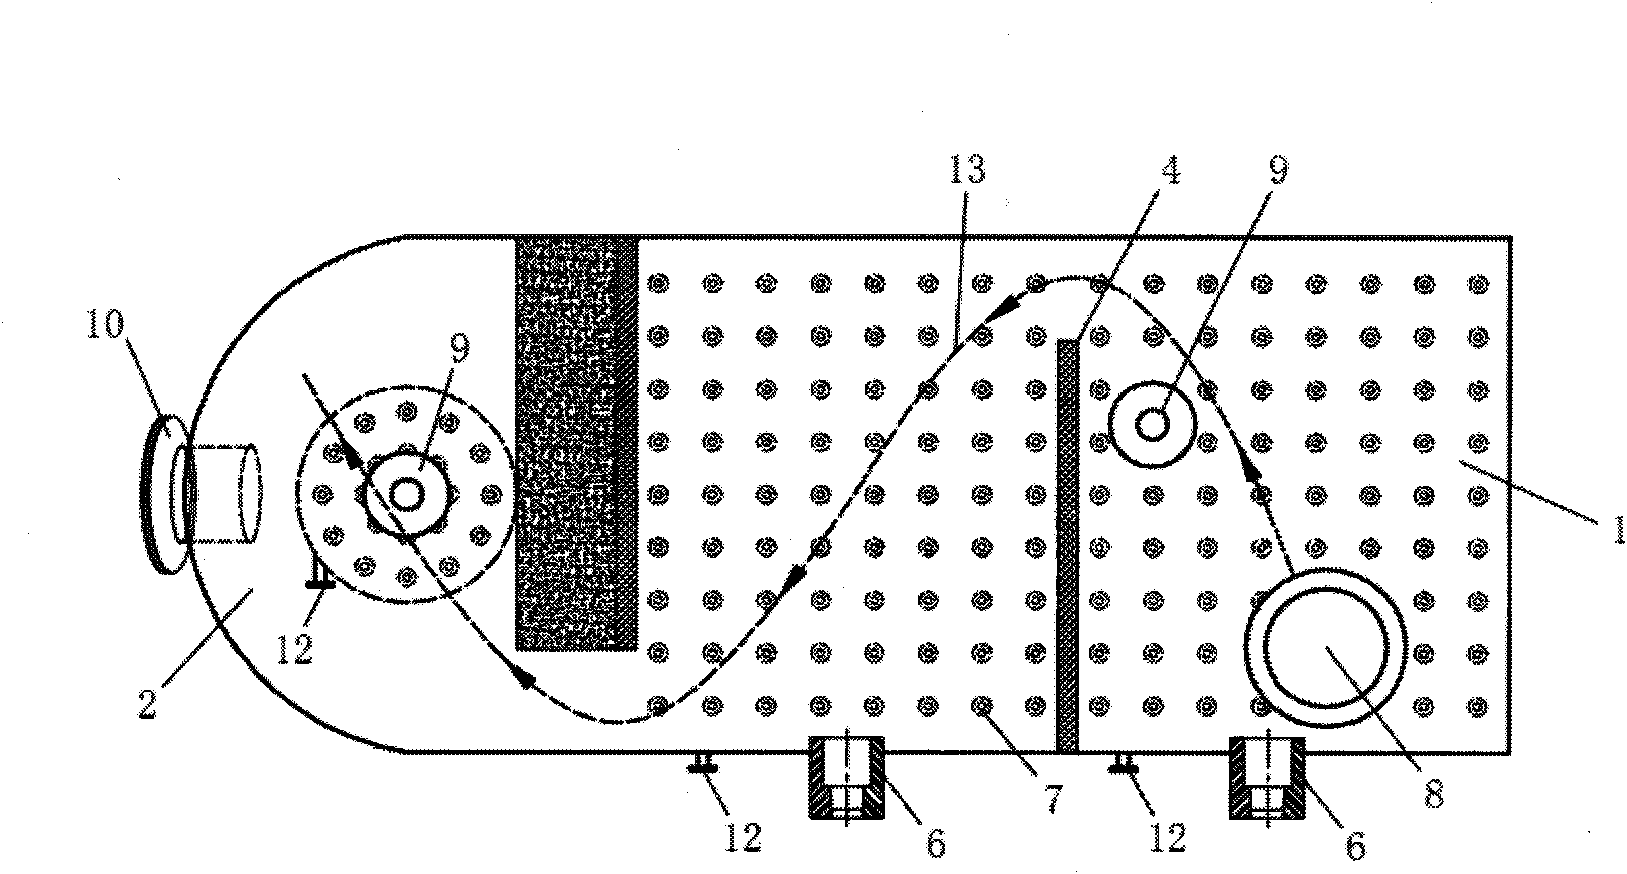 Fluidized bed deacidification purification device and process